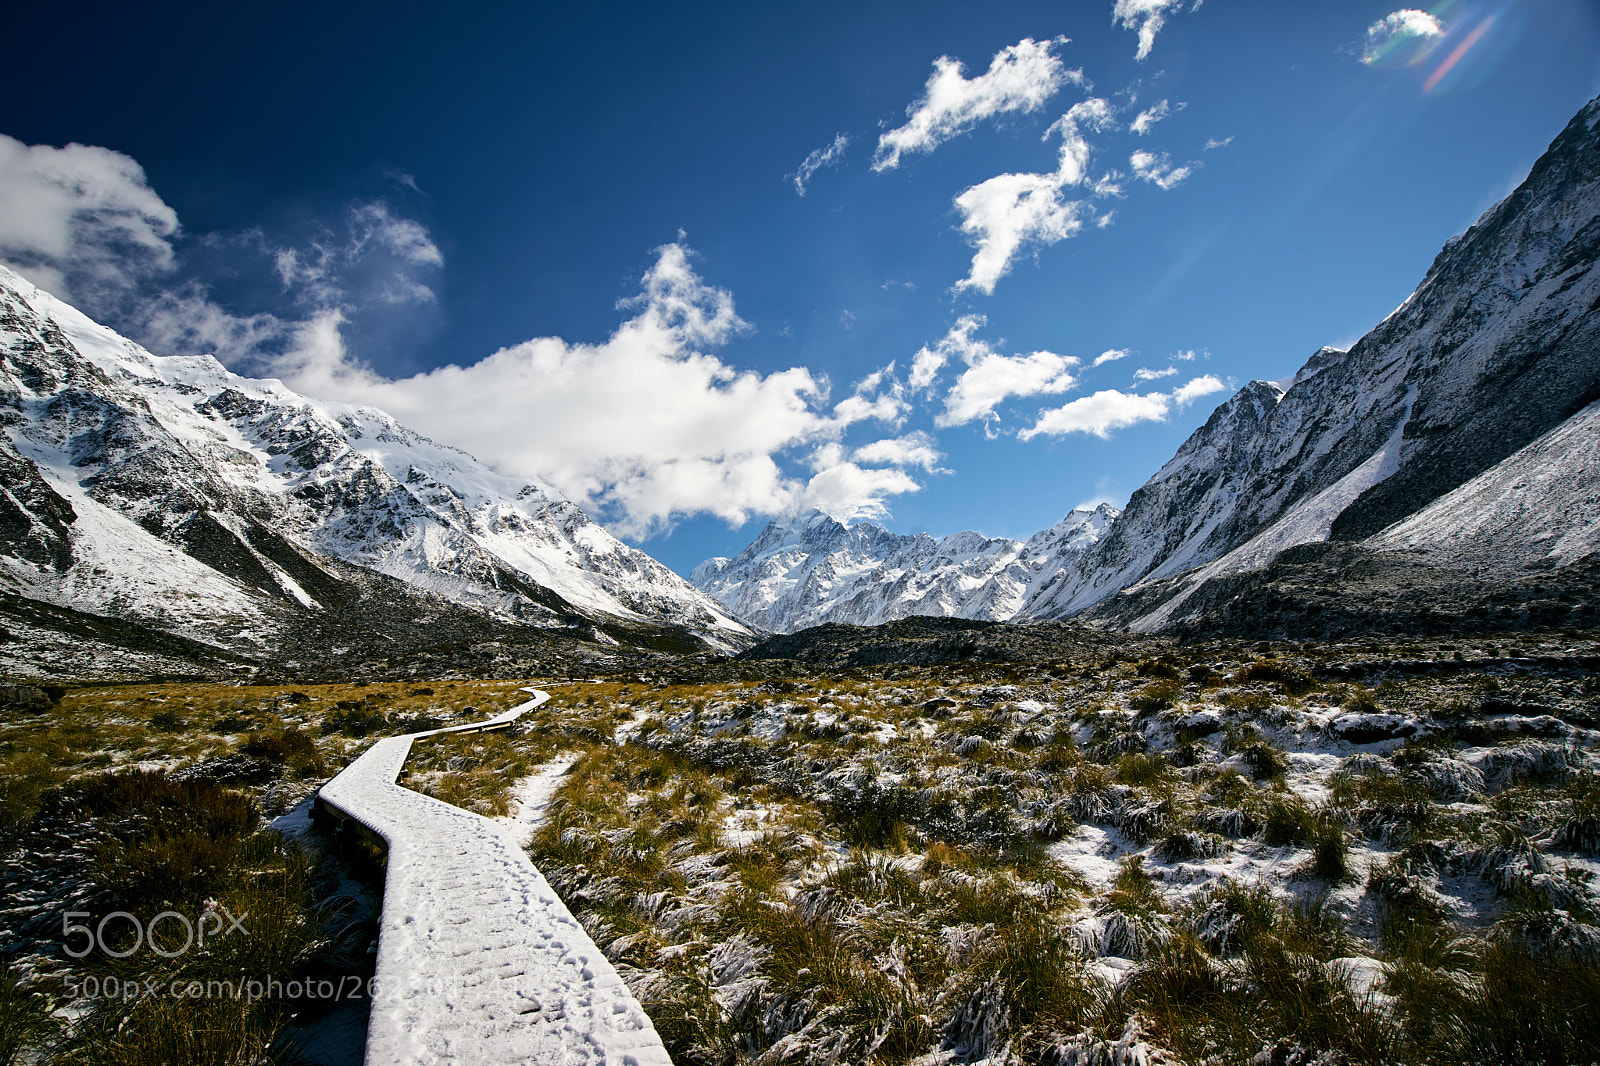 Sony a7 II sample photo. Hooker valley track photography